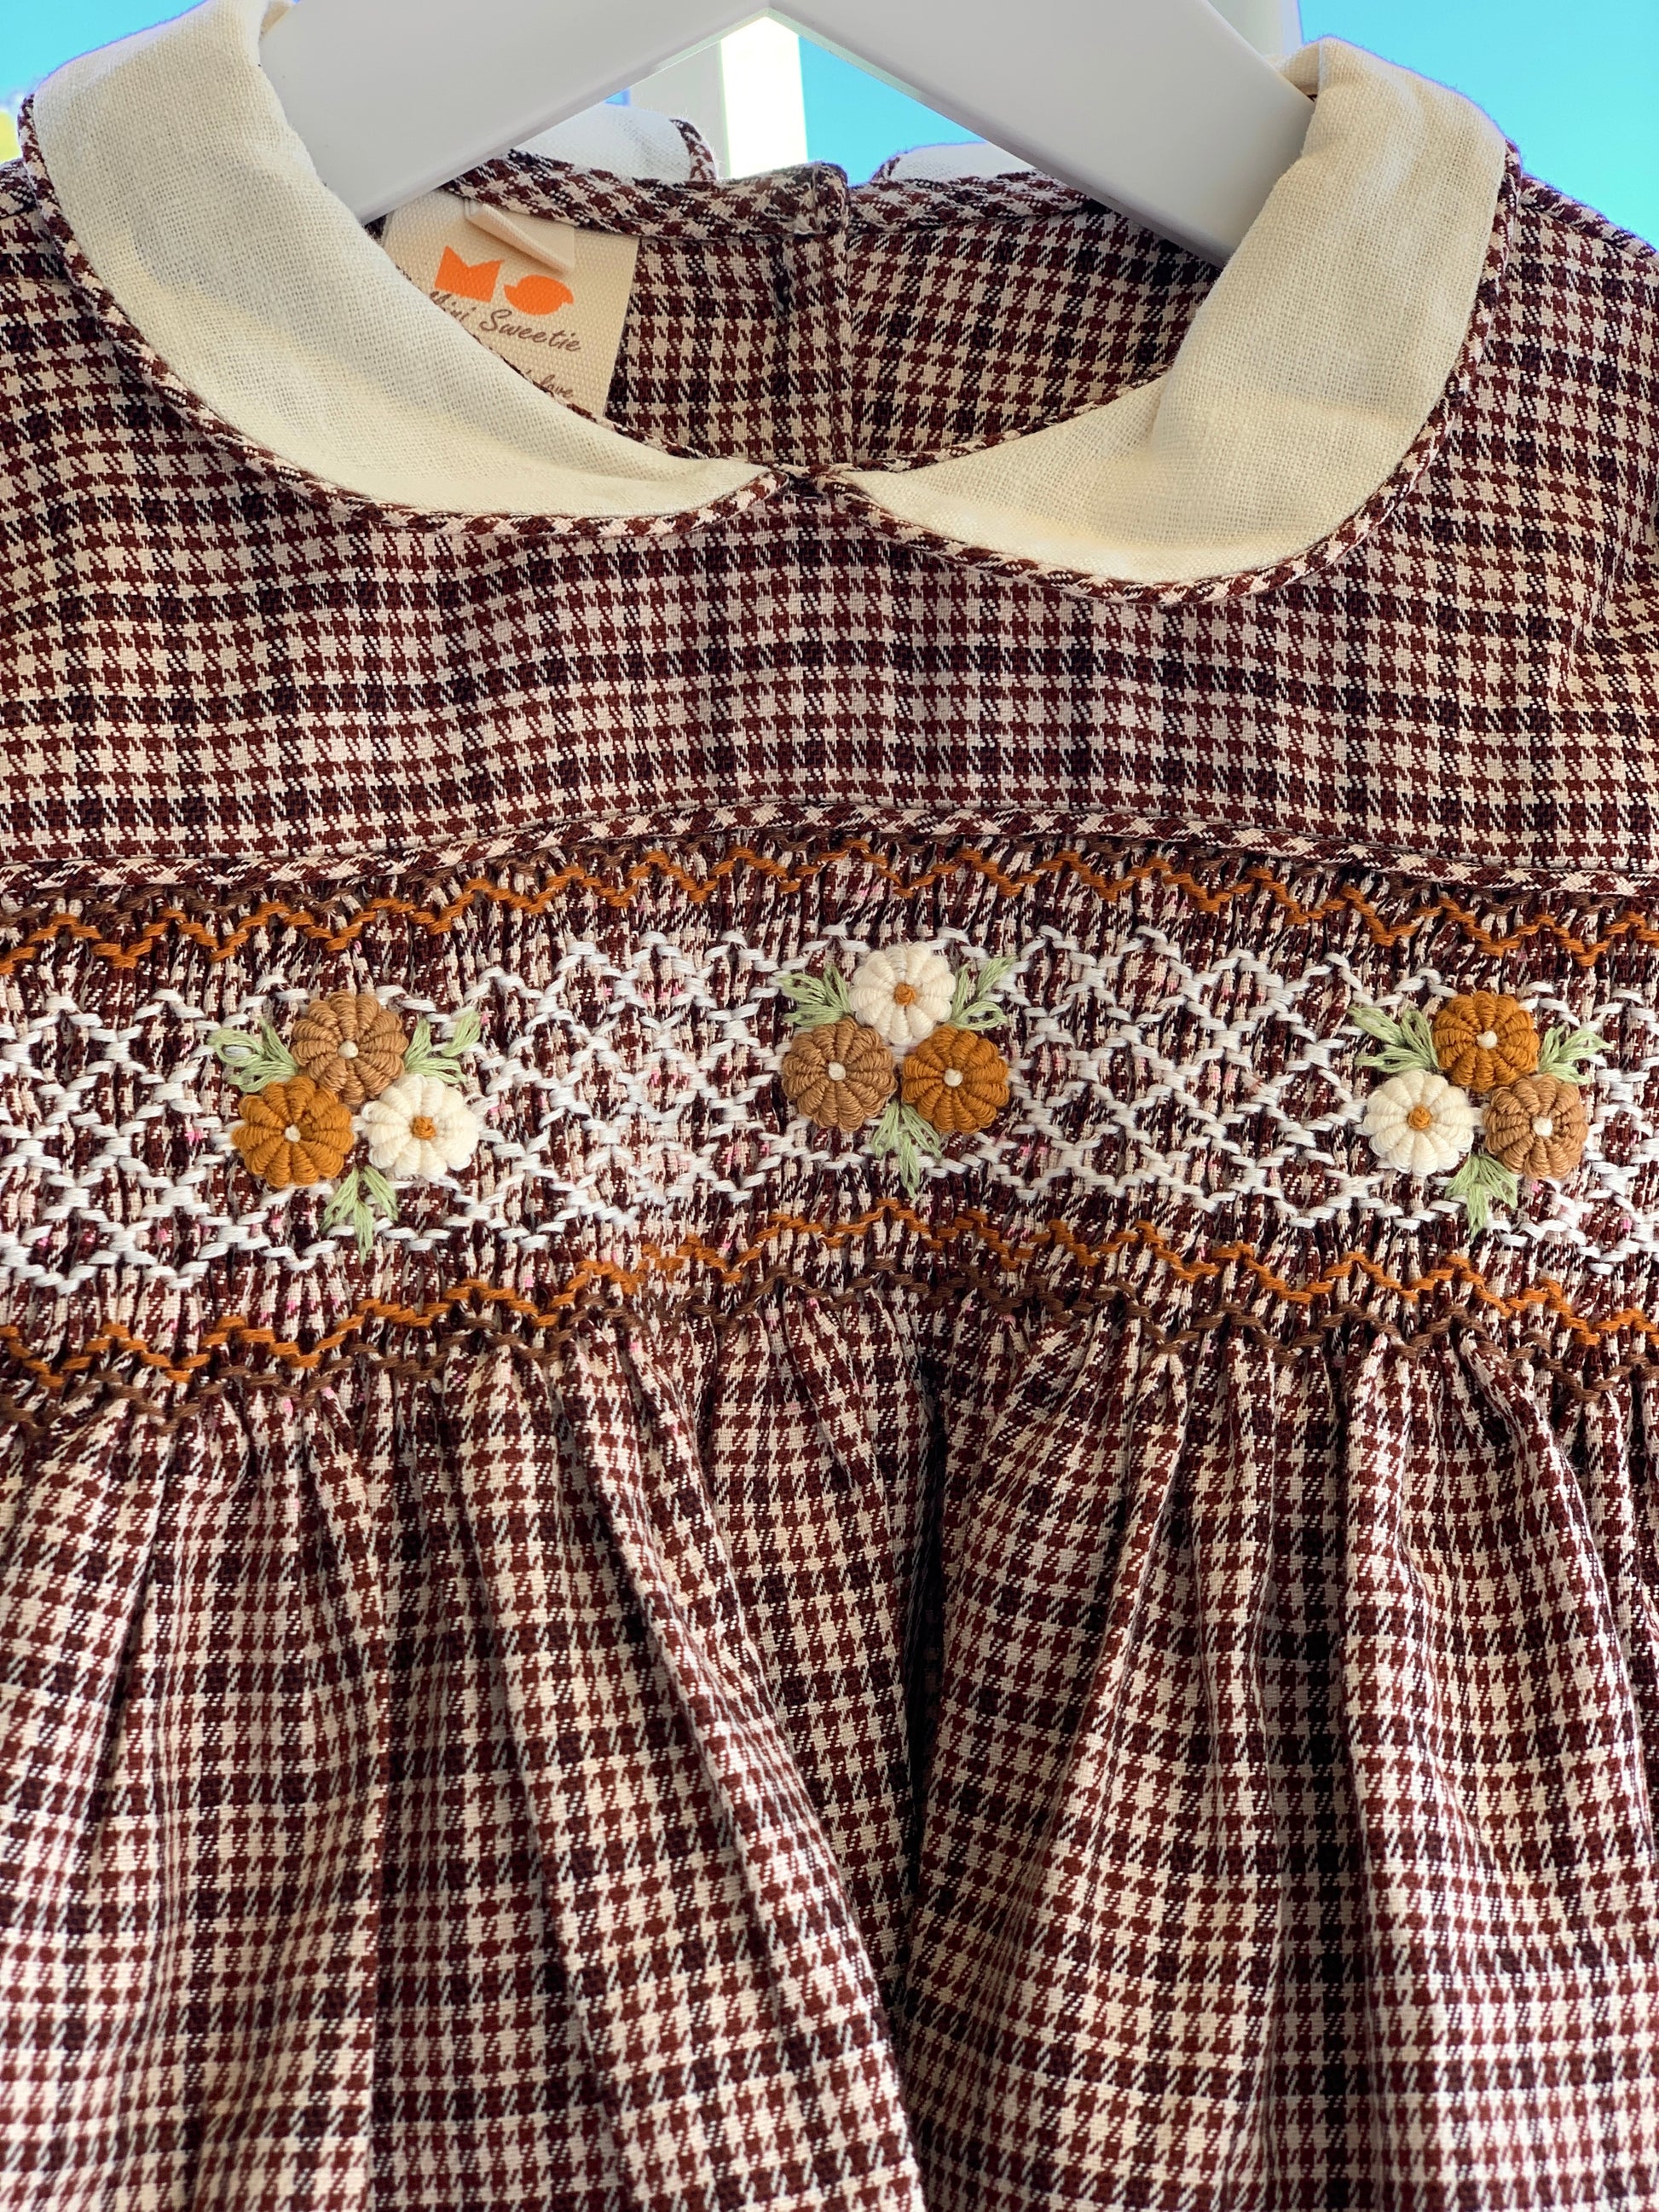 Classic brown checkered smocked dress.